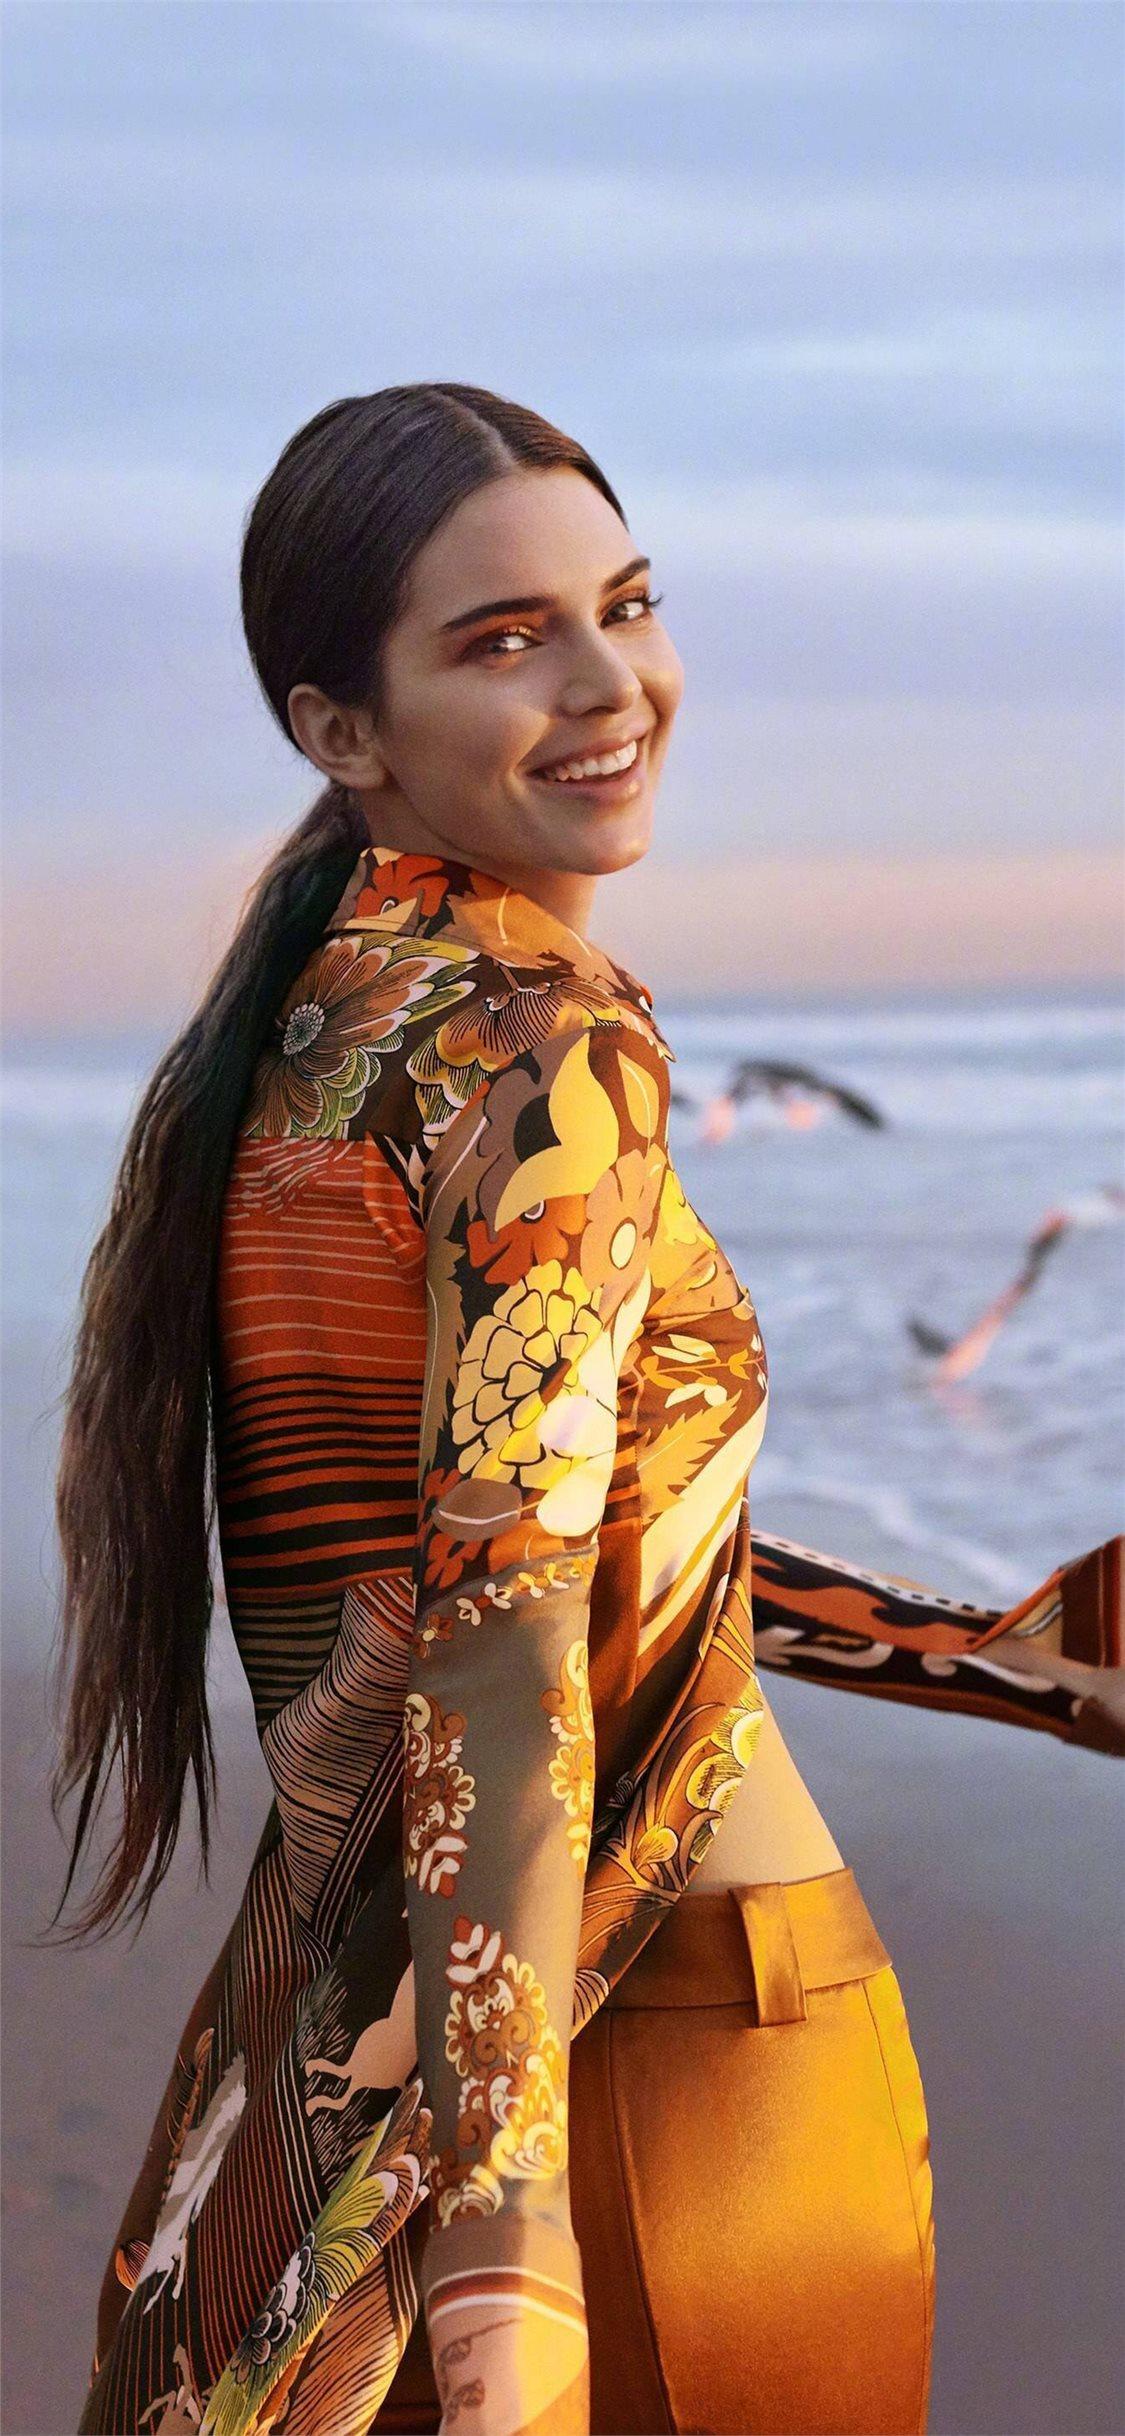 kendall jenner smiling 2019 iPhone X Wallpaper Free Download